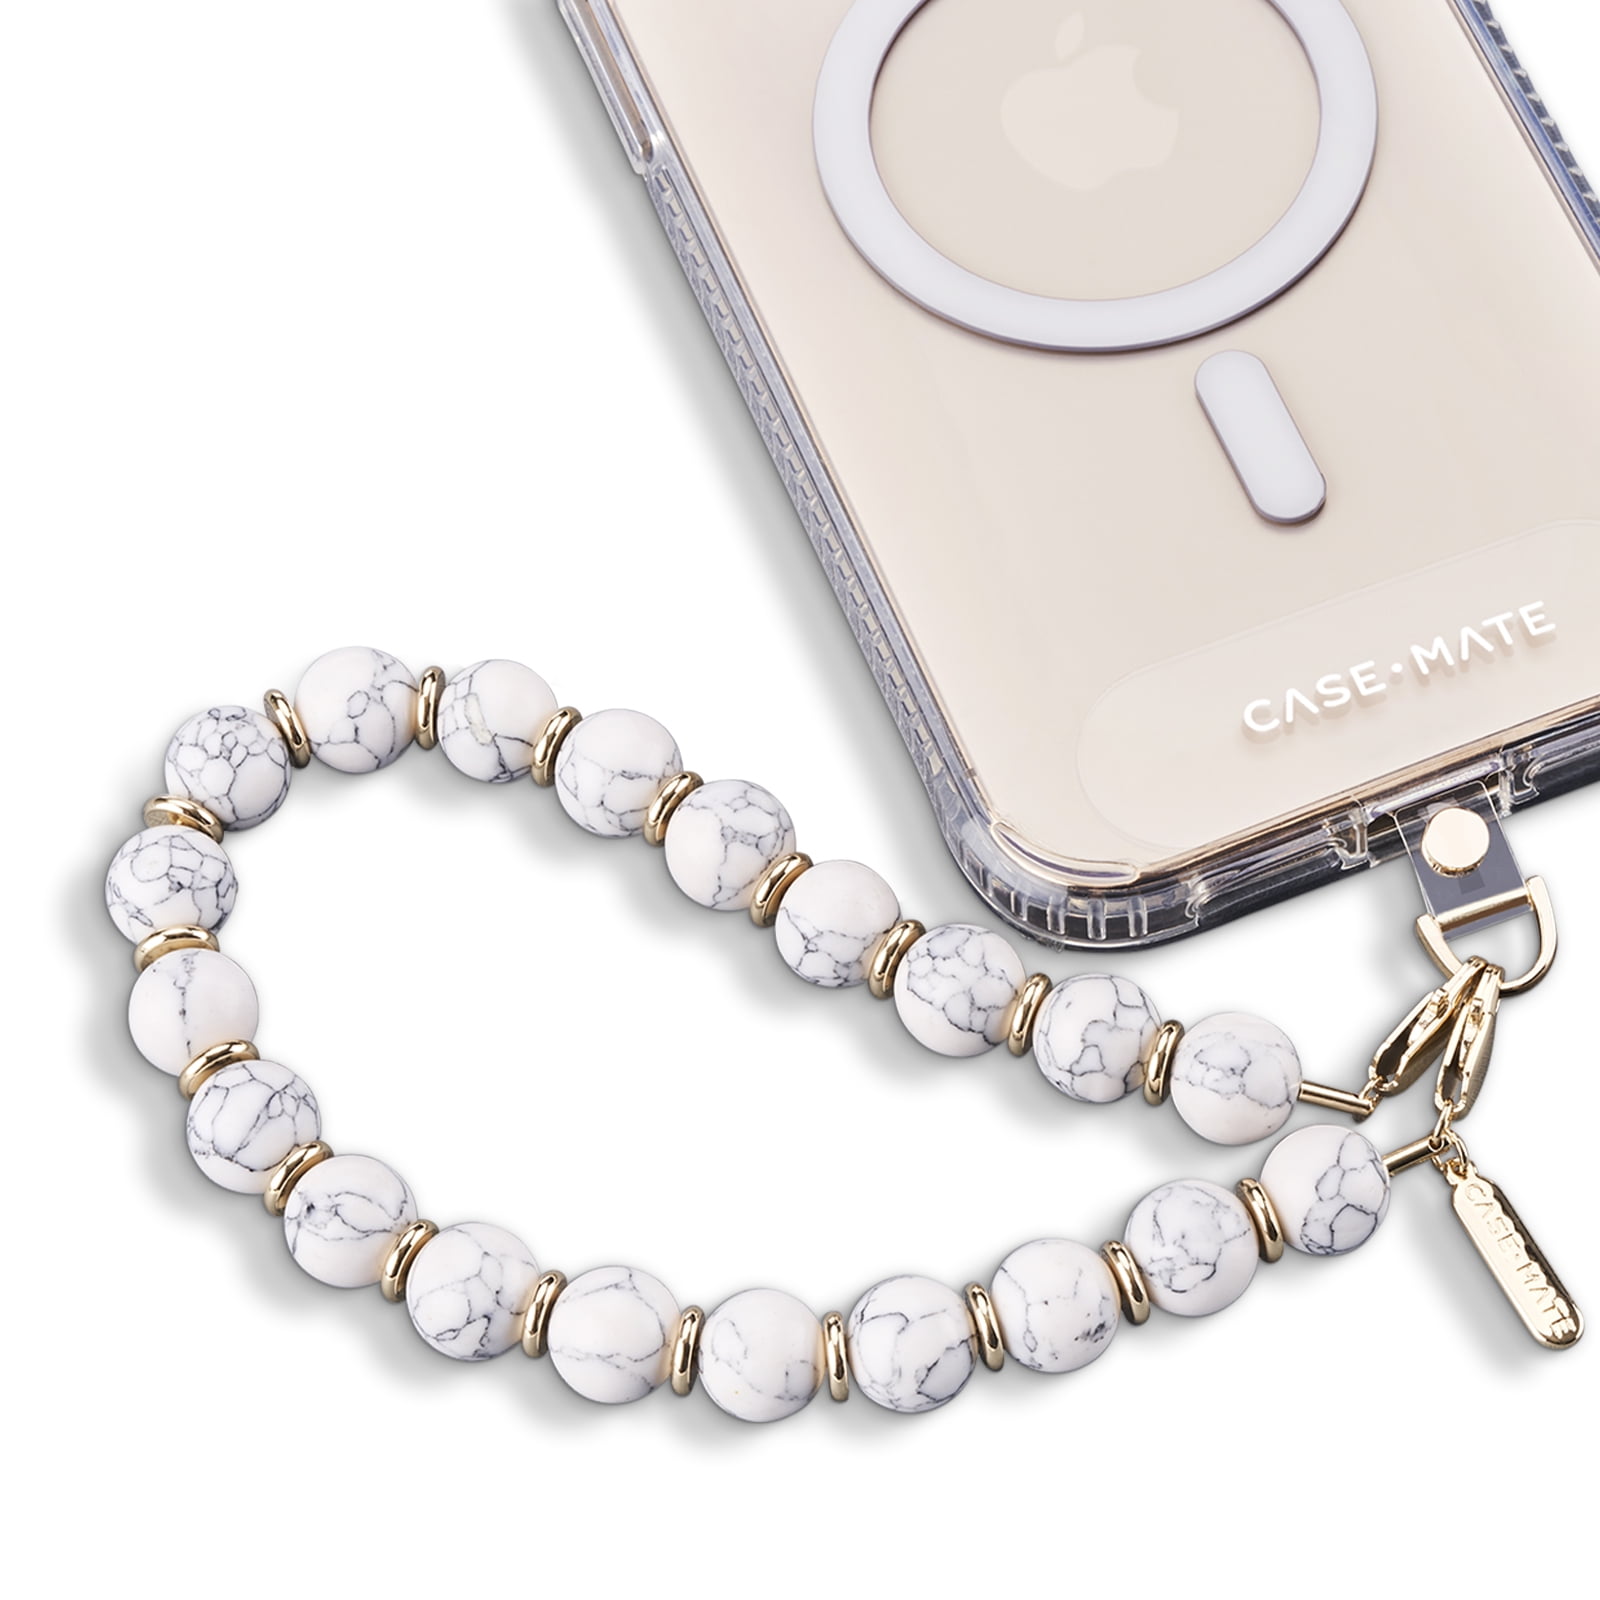 Case-Mate Crossbody Phone Lanyard/Chain [Works with All Phones] Hands-Free  Cell Phone Strap - Phone Charm - Neck Chain Holder for iPhone 15 Pro Max/